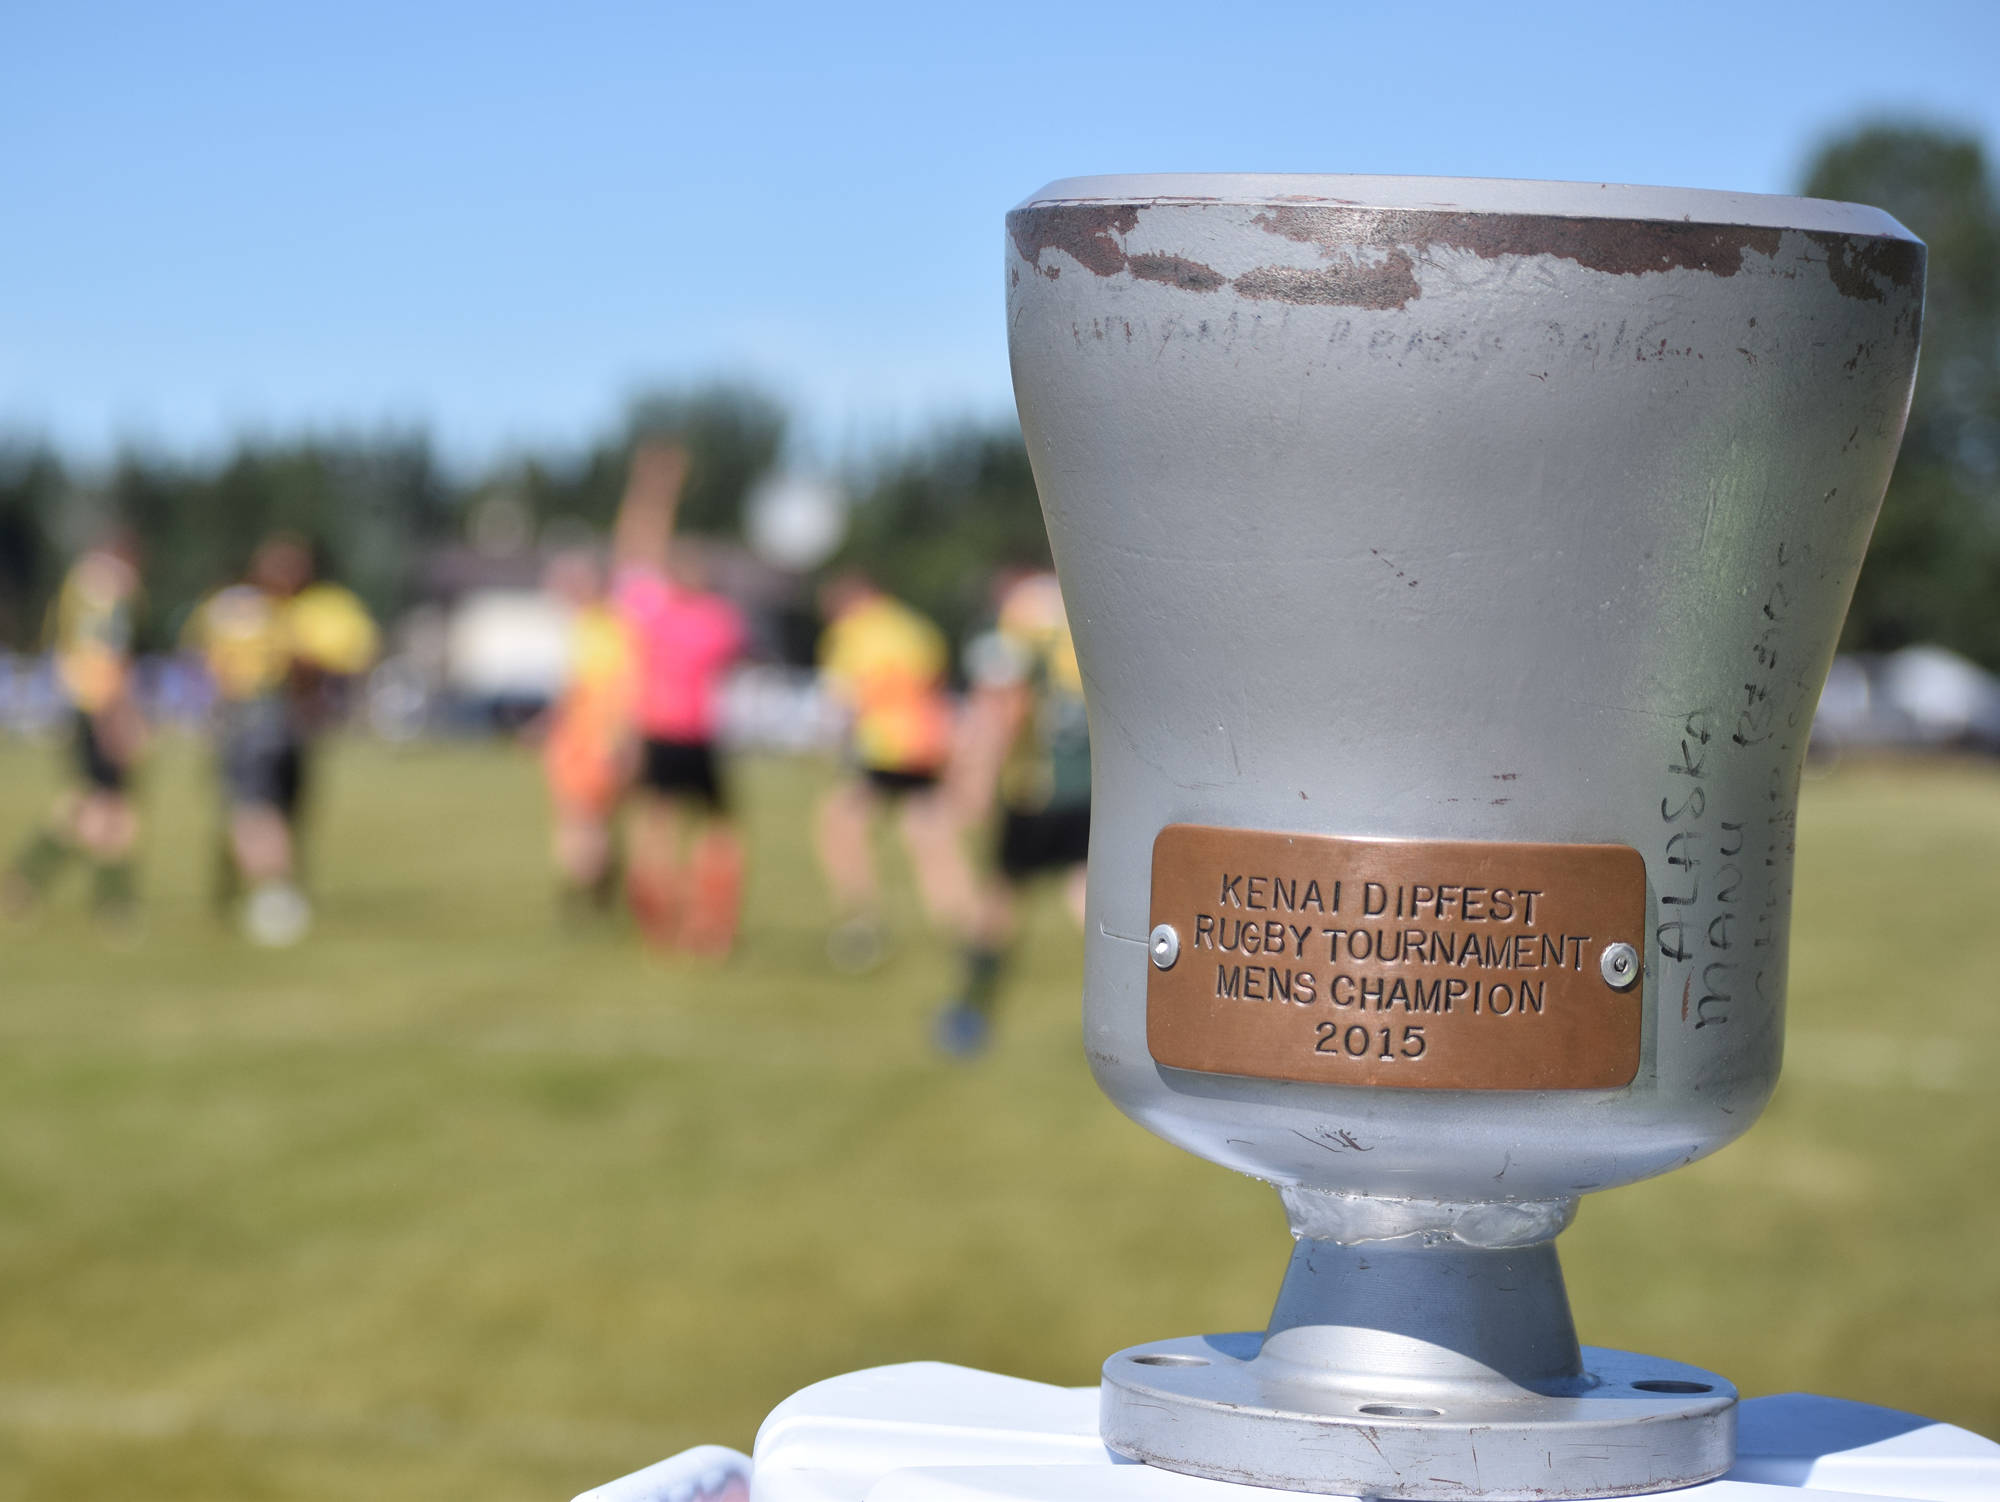 The Between the Tides Dipfest Rugby 10’s tournament trophy awaits a winner Saturday at Spur View field in Kenai. (Photo by Joey Klecka/Peninsula Clarion)